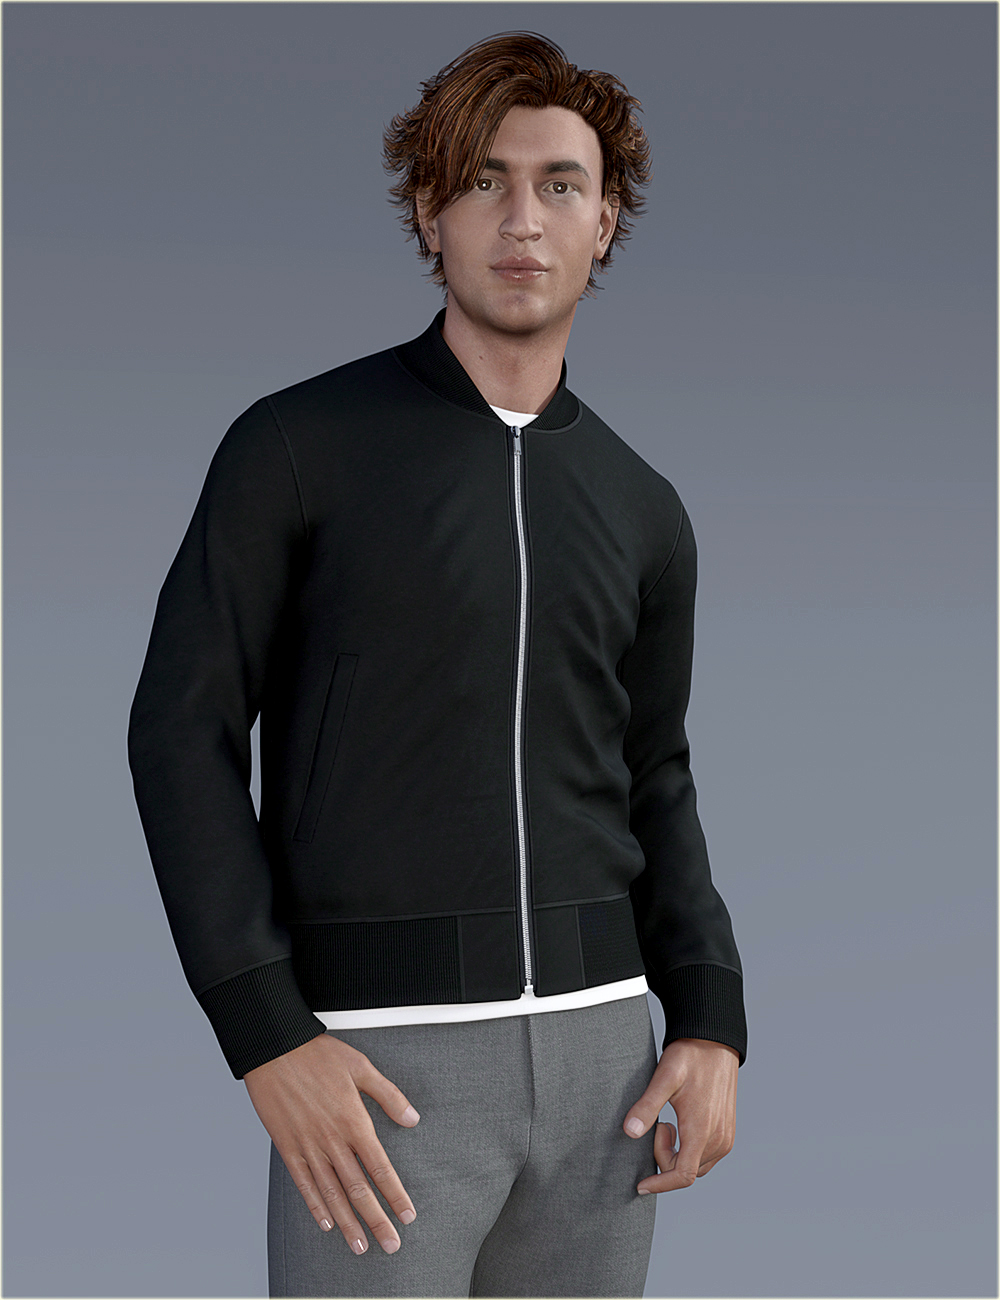 H&C dForce Basic Jacket Outfit for Genesis 8 Male(s) by: IH Kang, 3D Models by Daz 3D